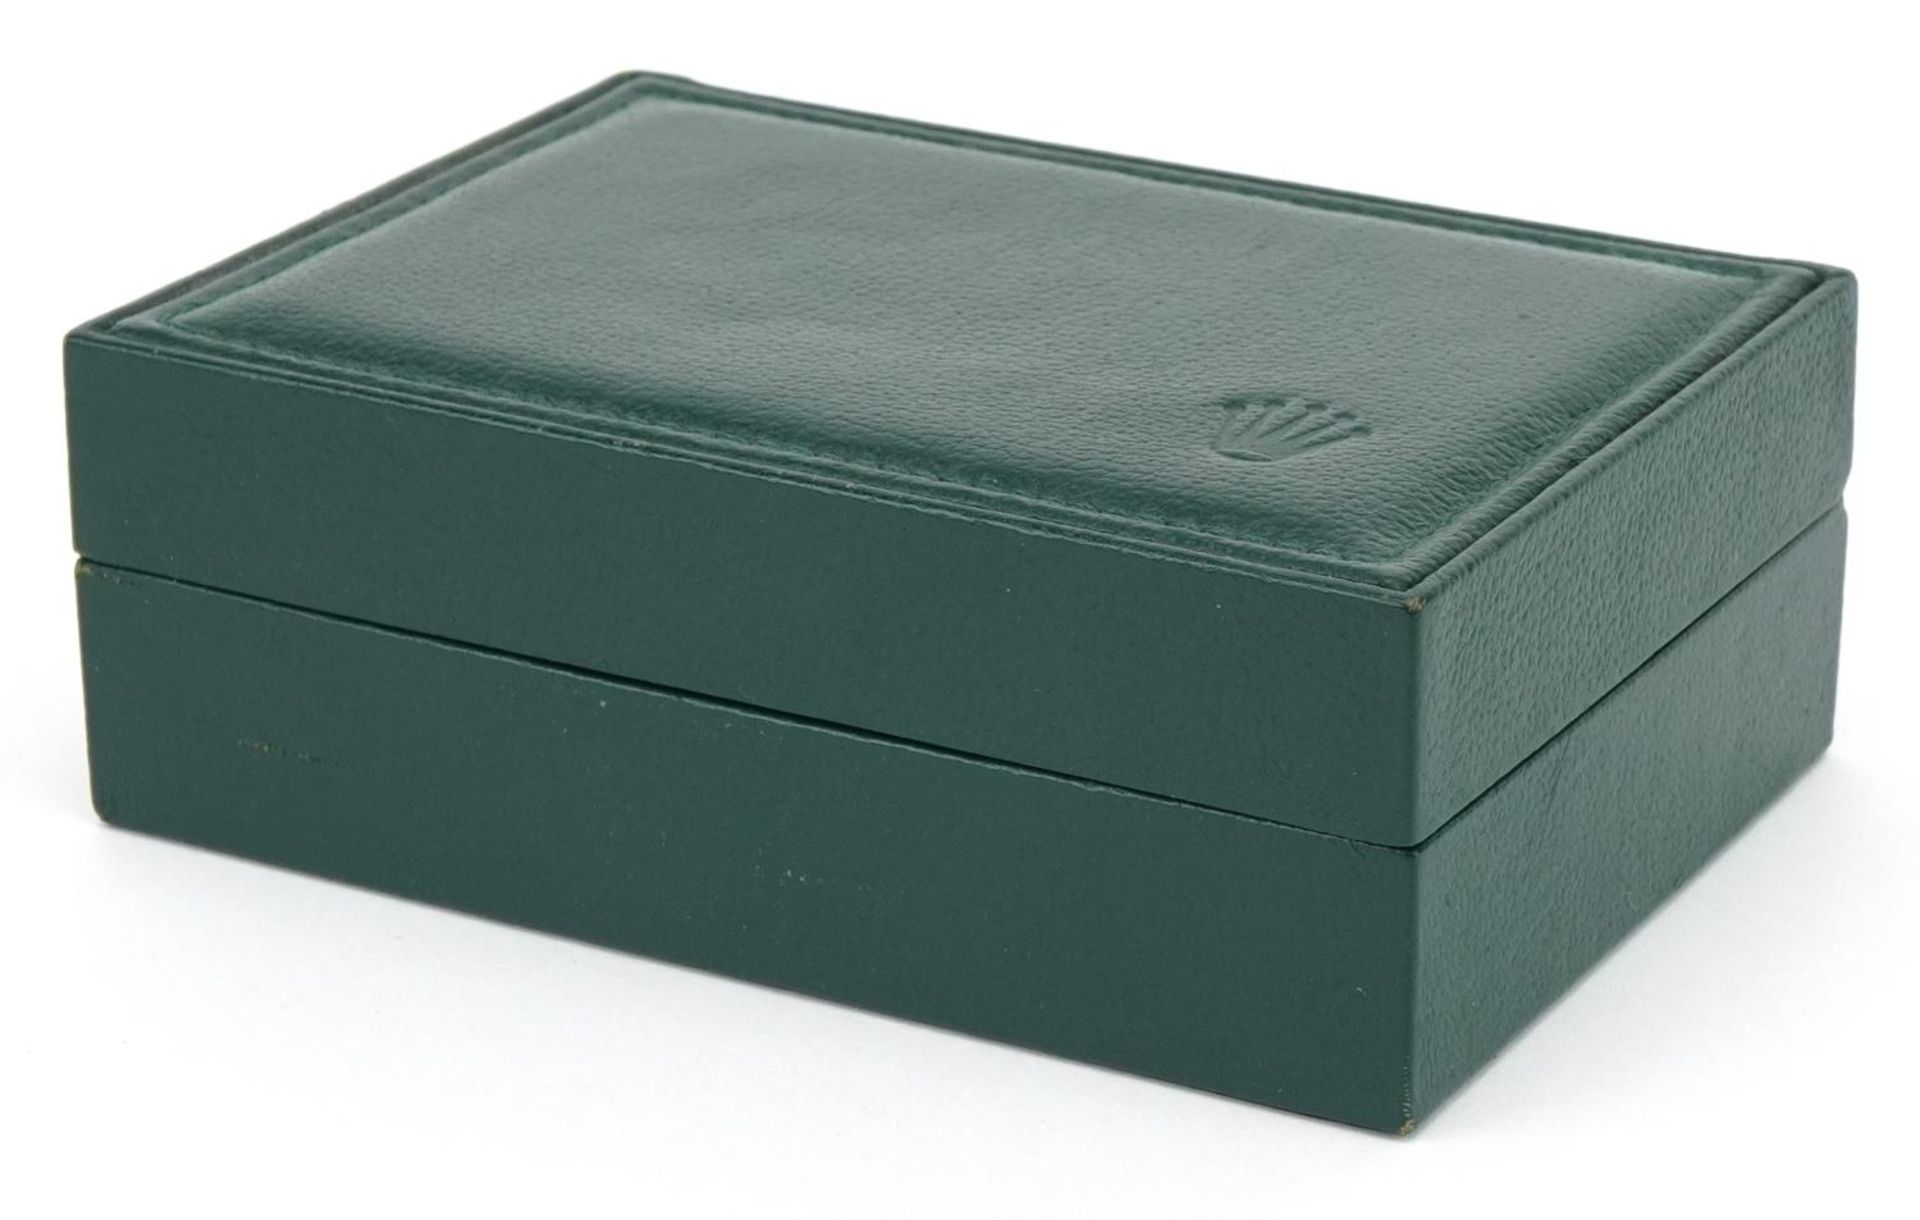 Rolex green leather wristwatch box, 14.5cm wide : For further information on this lot please visit